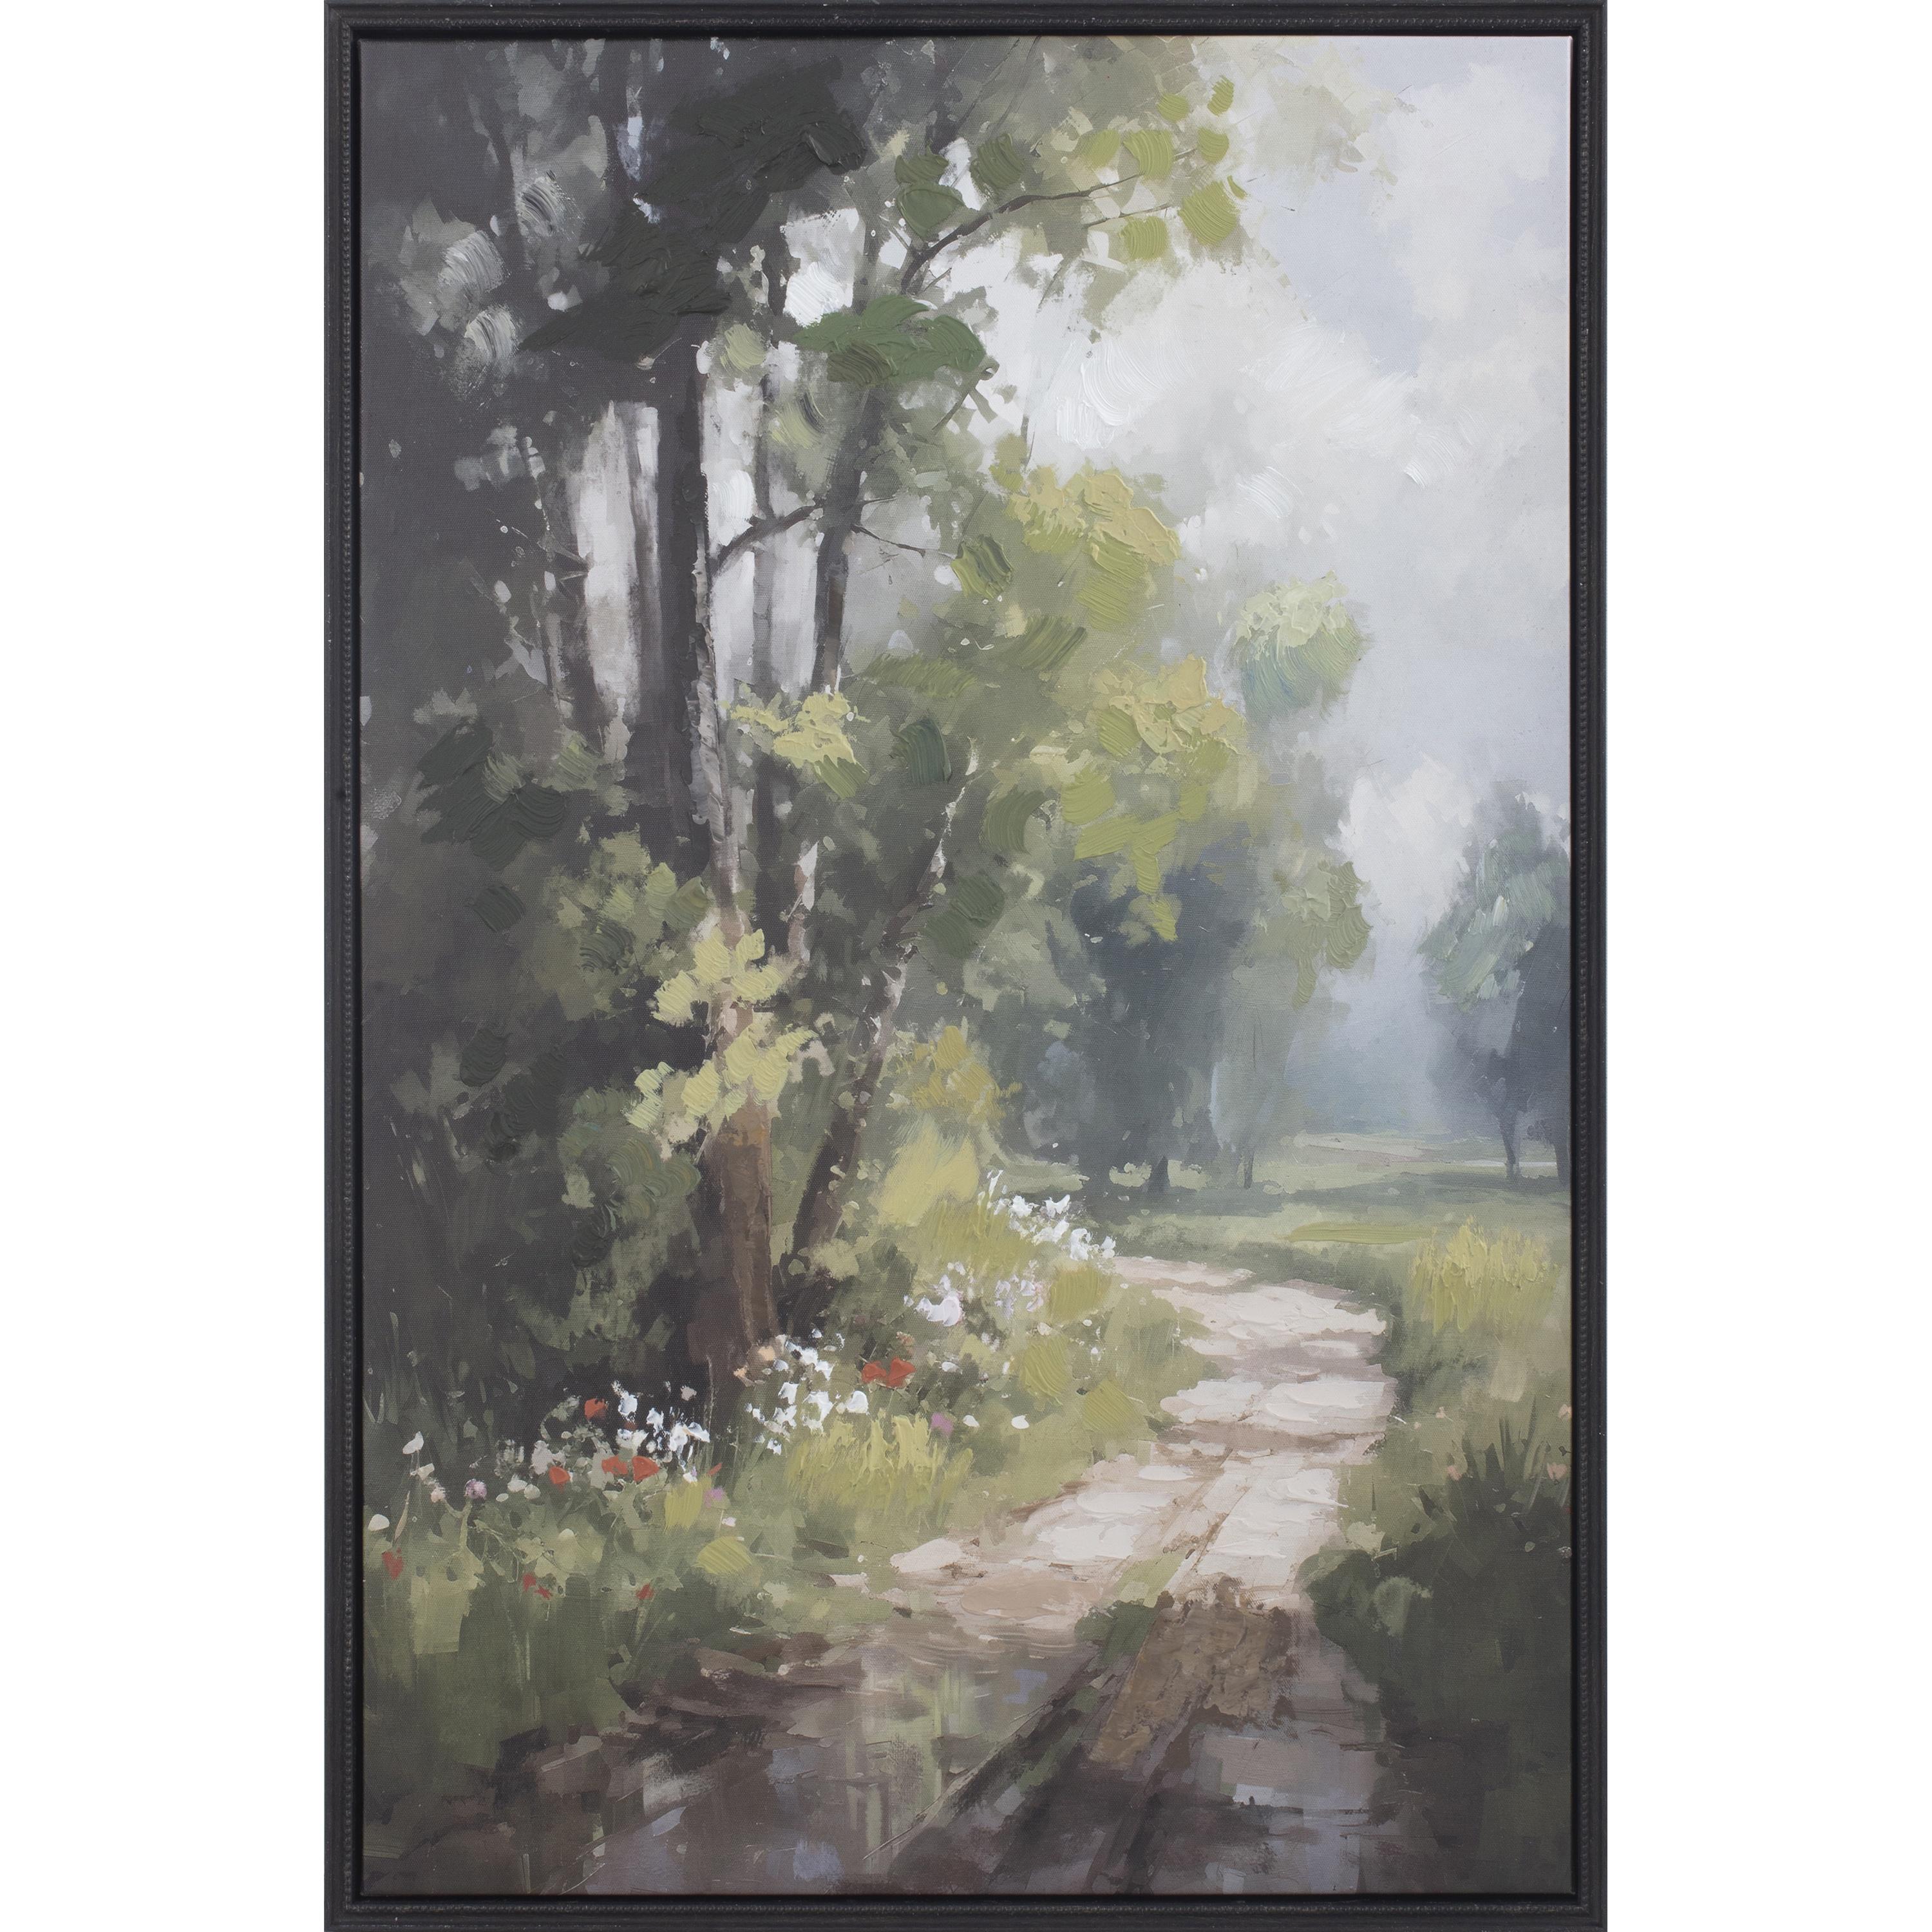 My Texas House Tree Lined Path Landscape Framed Emb Canvas 24" x 36" - image 1 of 5